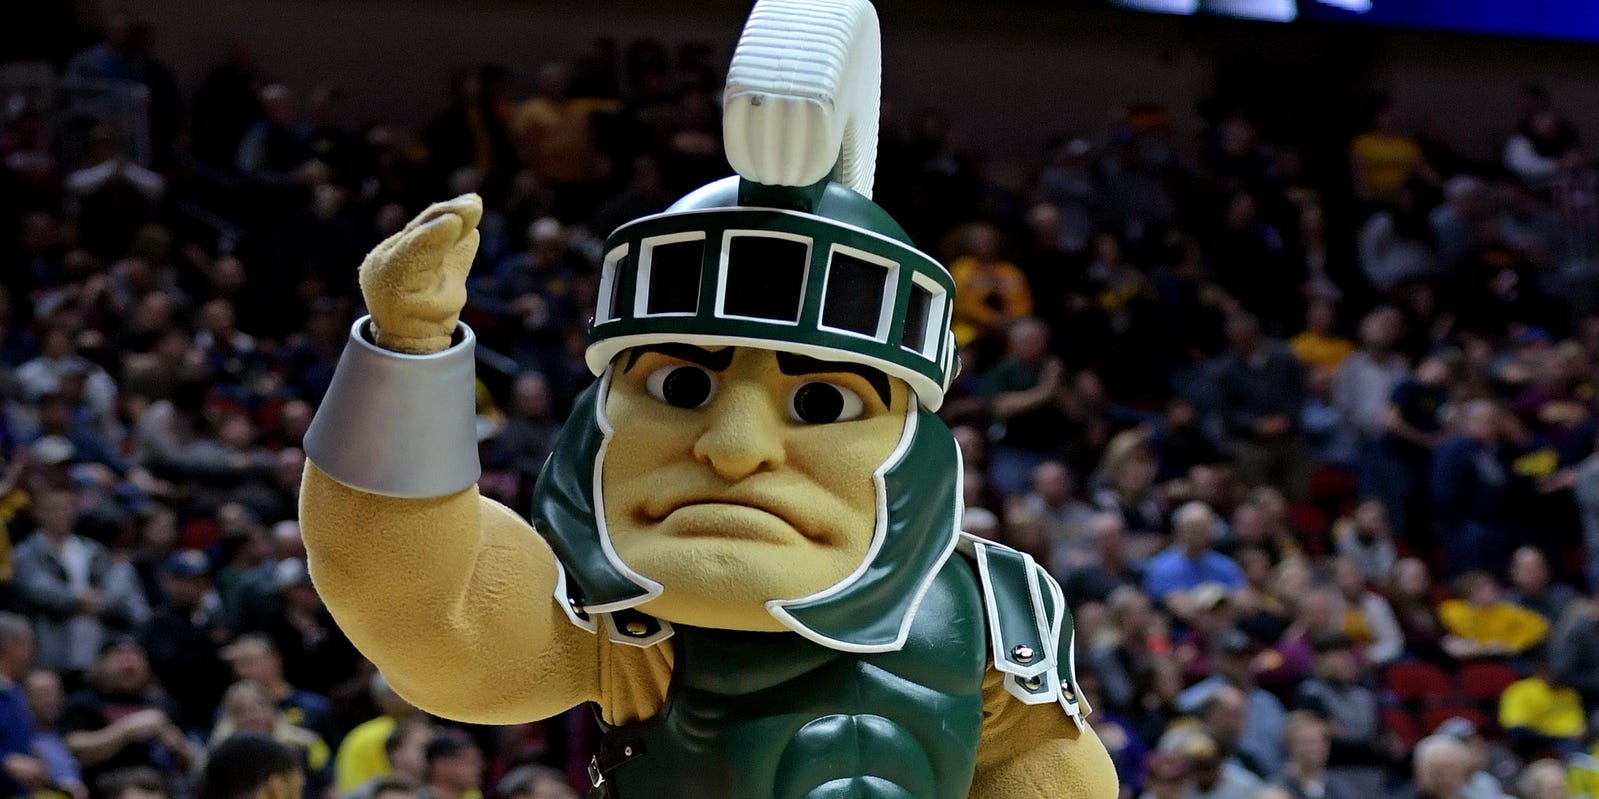 Fun Facts About Msu S Sparty 3 Time National Mascot Of The Year Winner